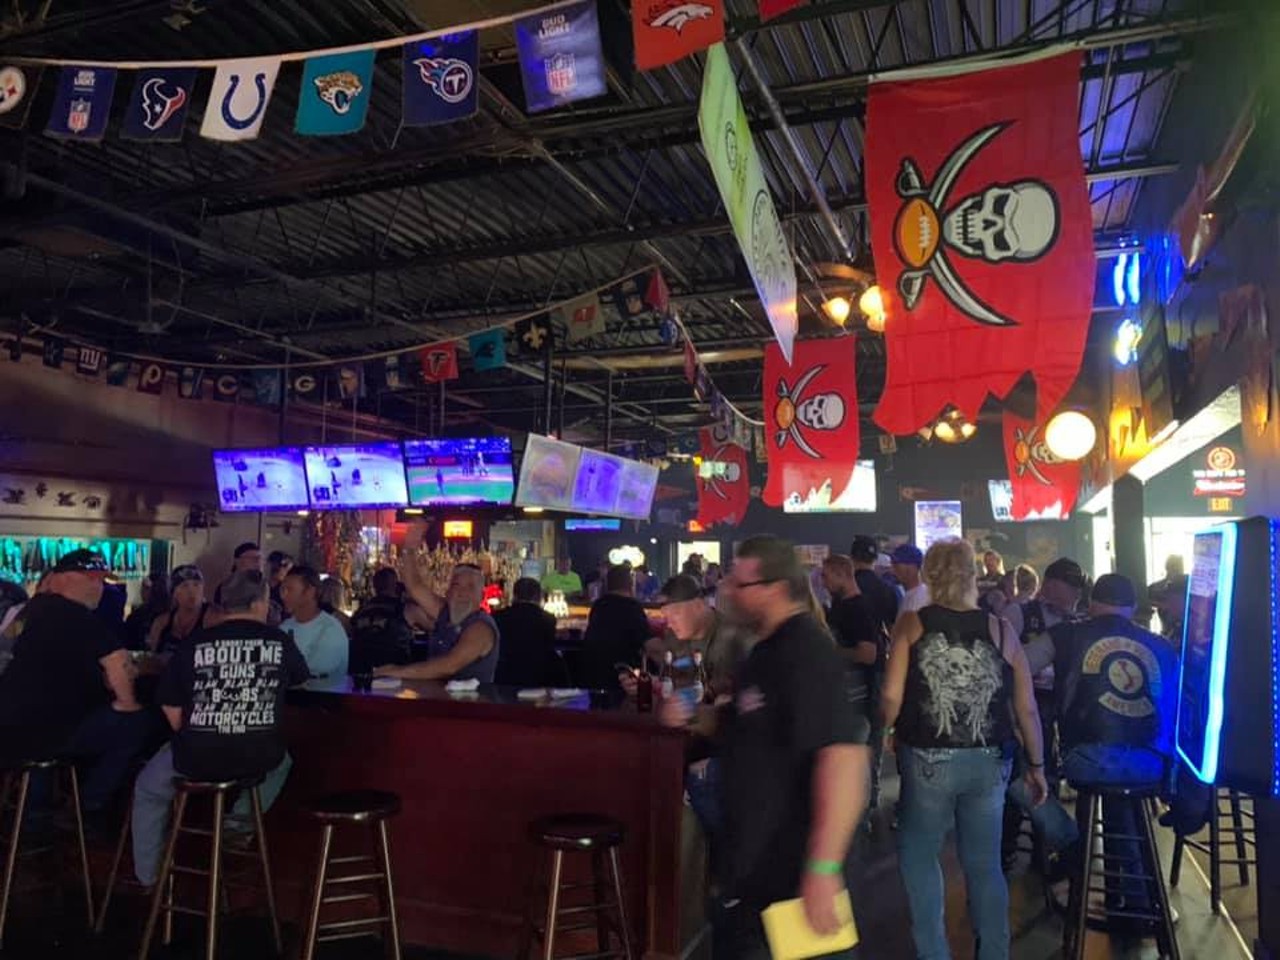 Slizzy McGee’s  
1159 62nd Ave. N, St. Petersburg, 727-289-3118
Decked out in flat-screen TV’s, Slizzy McGee’s is a great spot to grab a beer and watch the game. This bar offers special deals such as hospitality night, offering $3 wells, $2 domestic drafts, and 20% off on Tuesdays, and celebrated its five year anniversary earlier this year. This is a great spot to go to if you’re trying to get slizzy. 
Photo via Slizzy McGee’s/Facebook